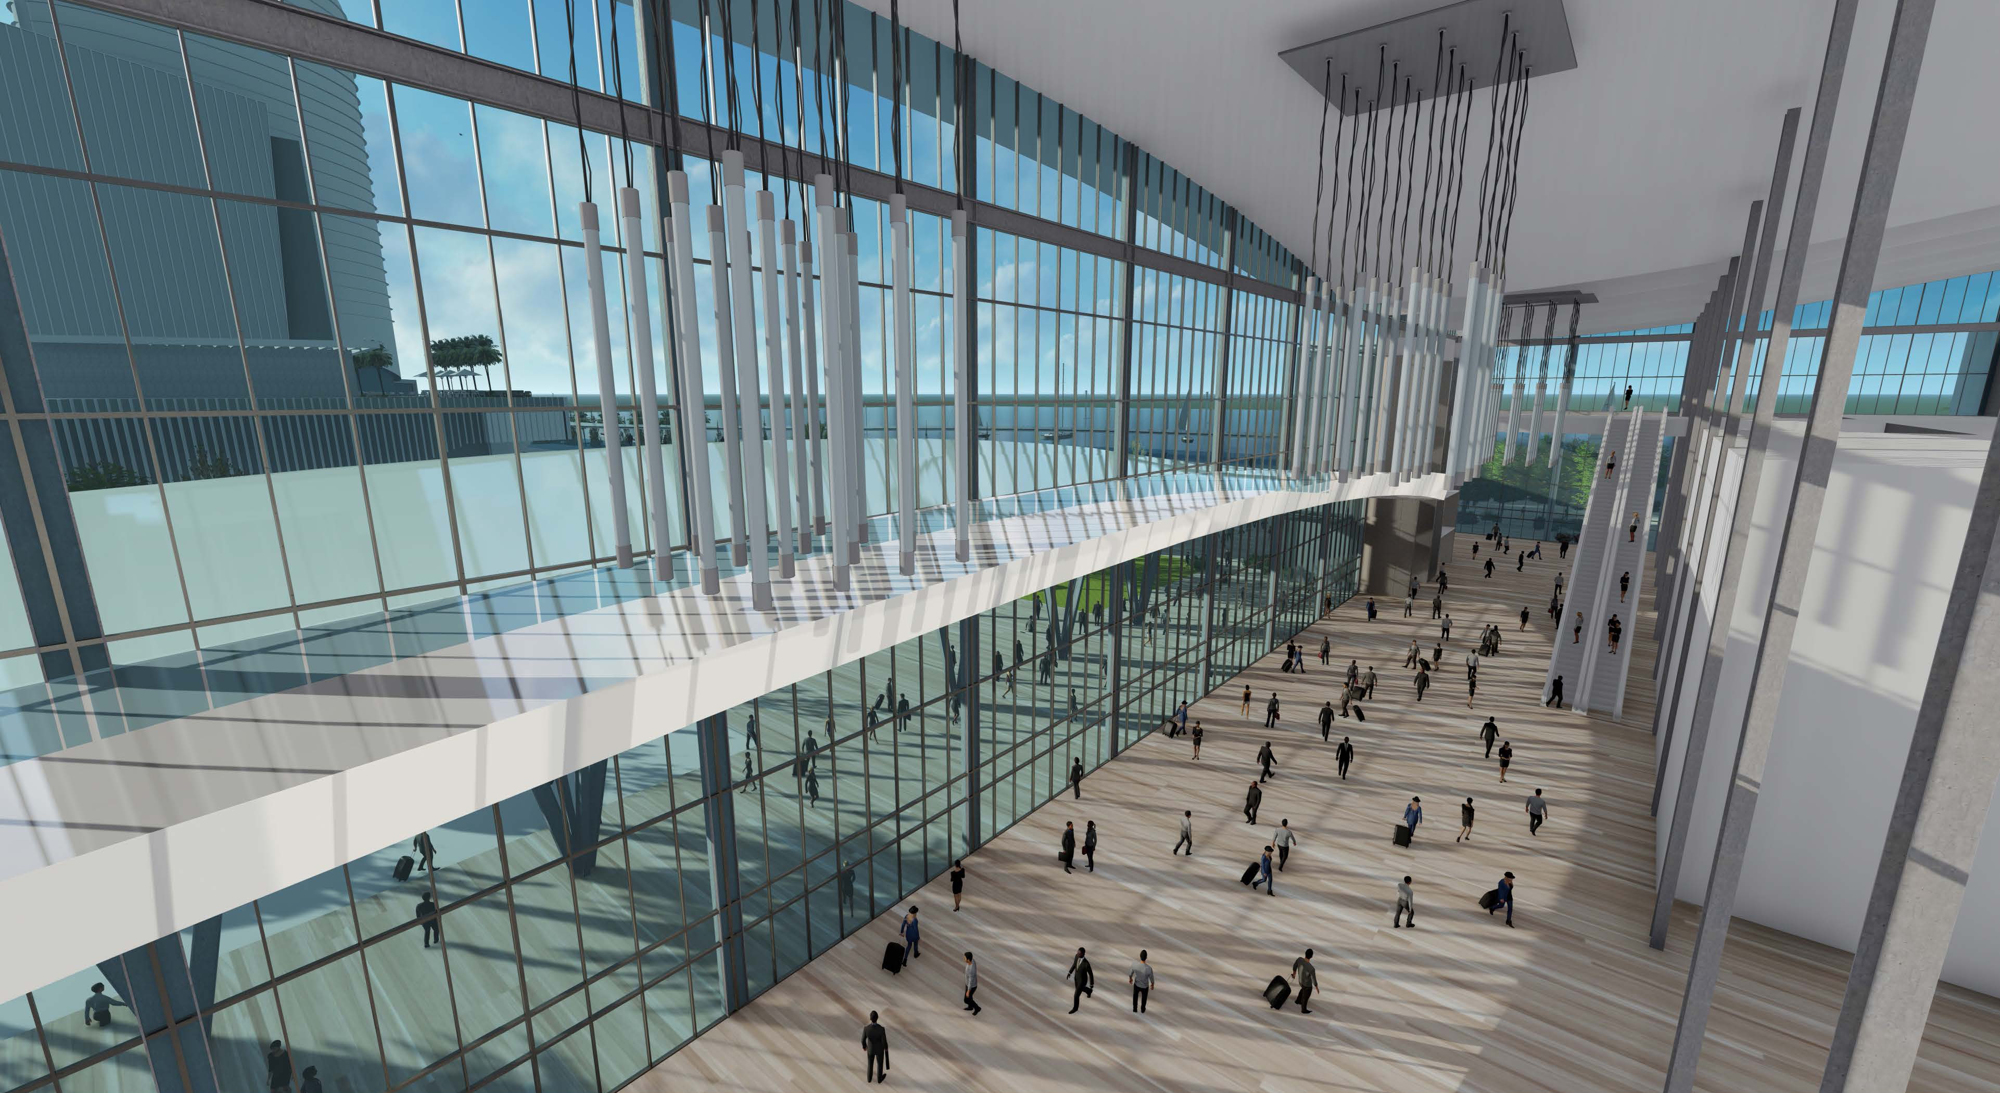 The convention center hotel would feature 200,000 in additional square feet of exhibition space, a 40,000-square-foot ballroom and 45 breakout rooms.